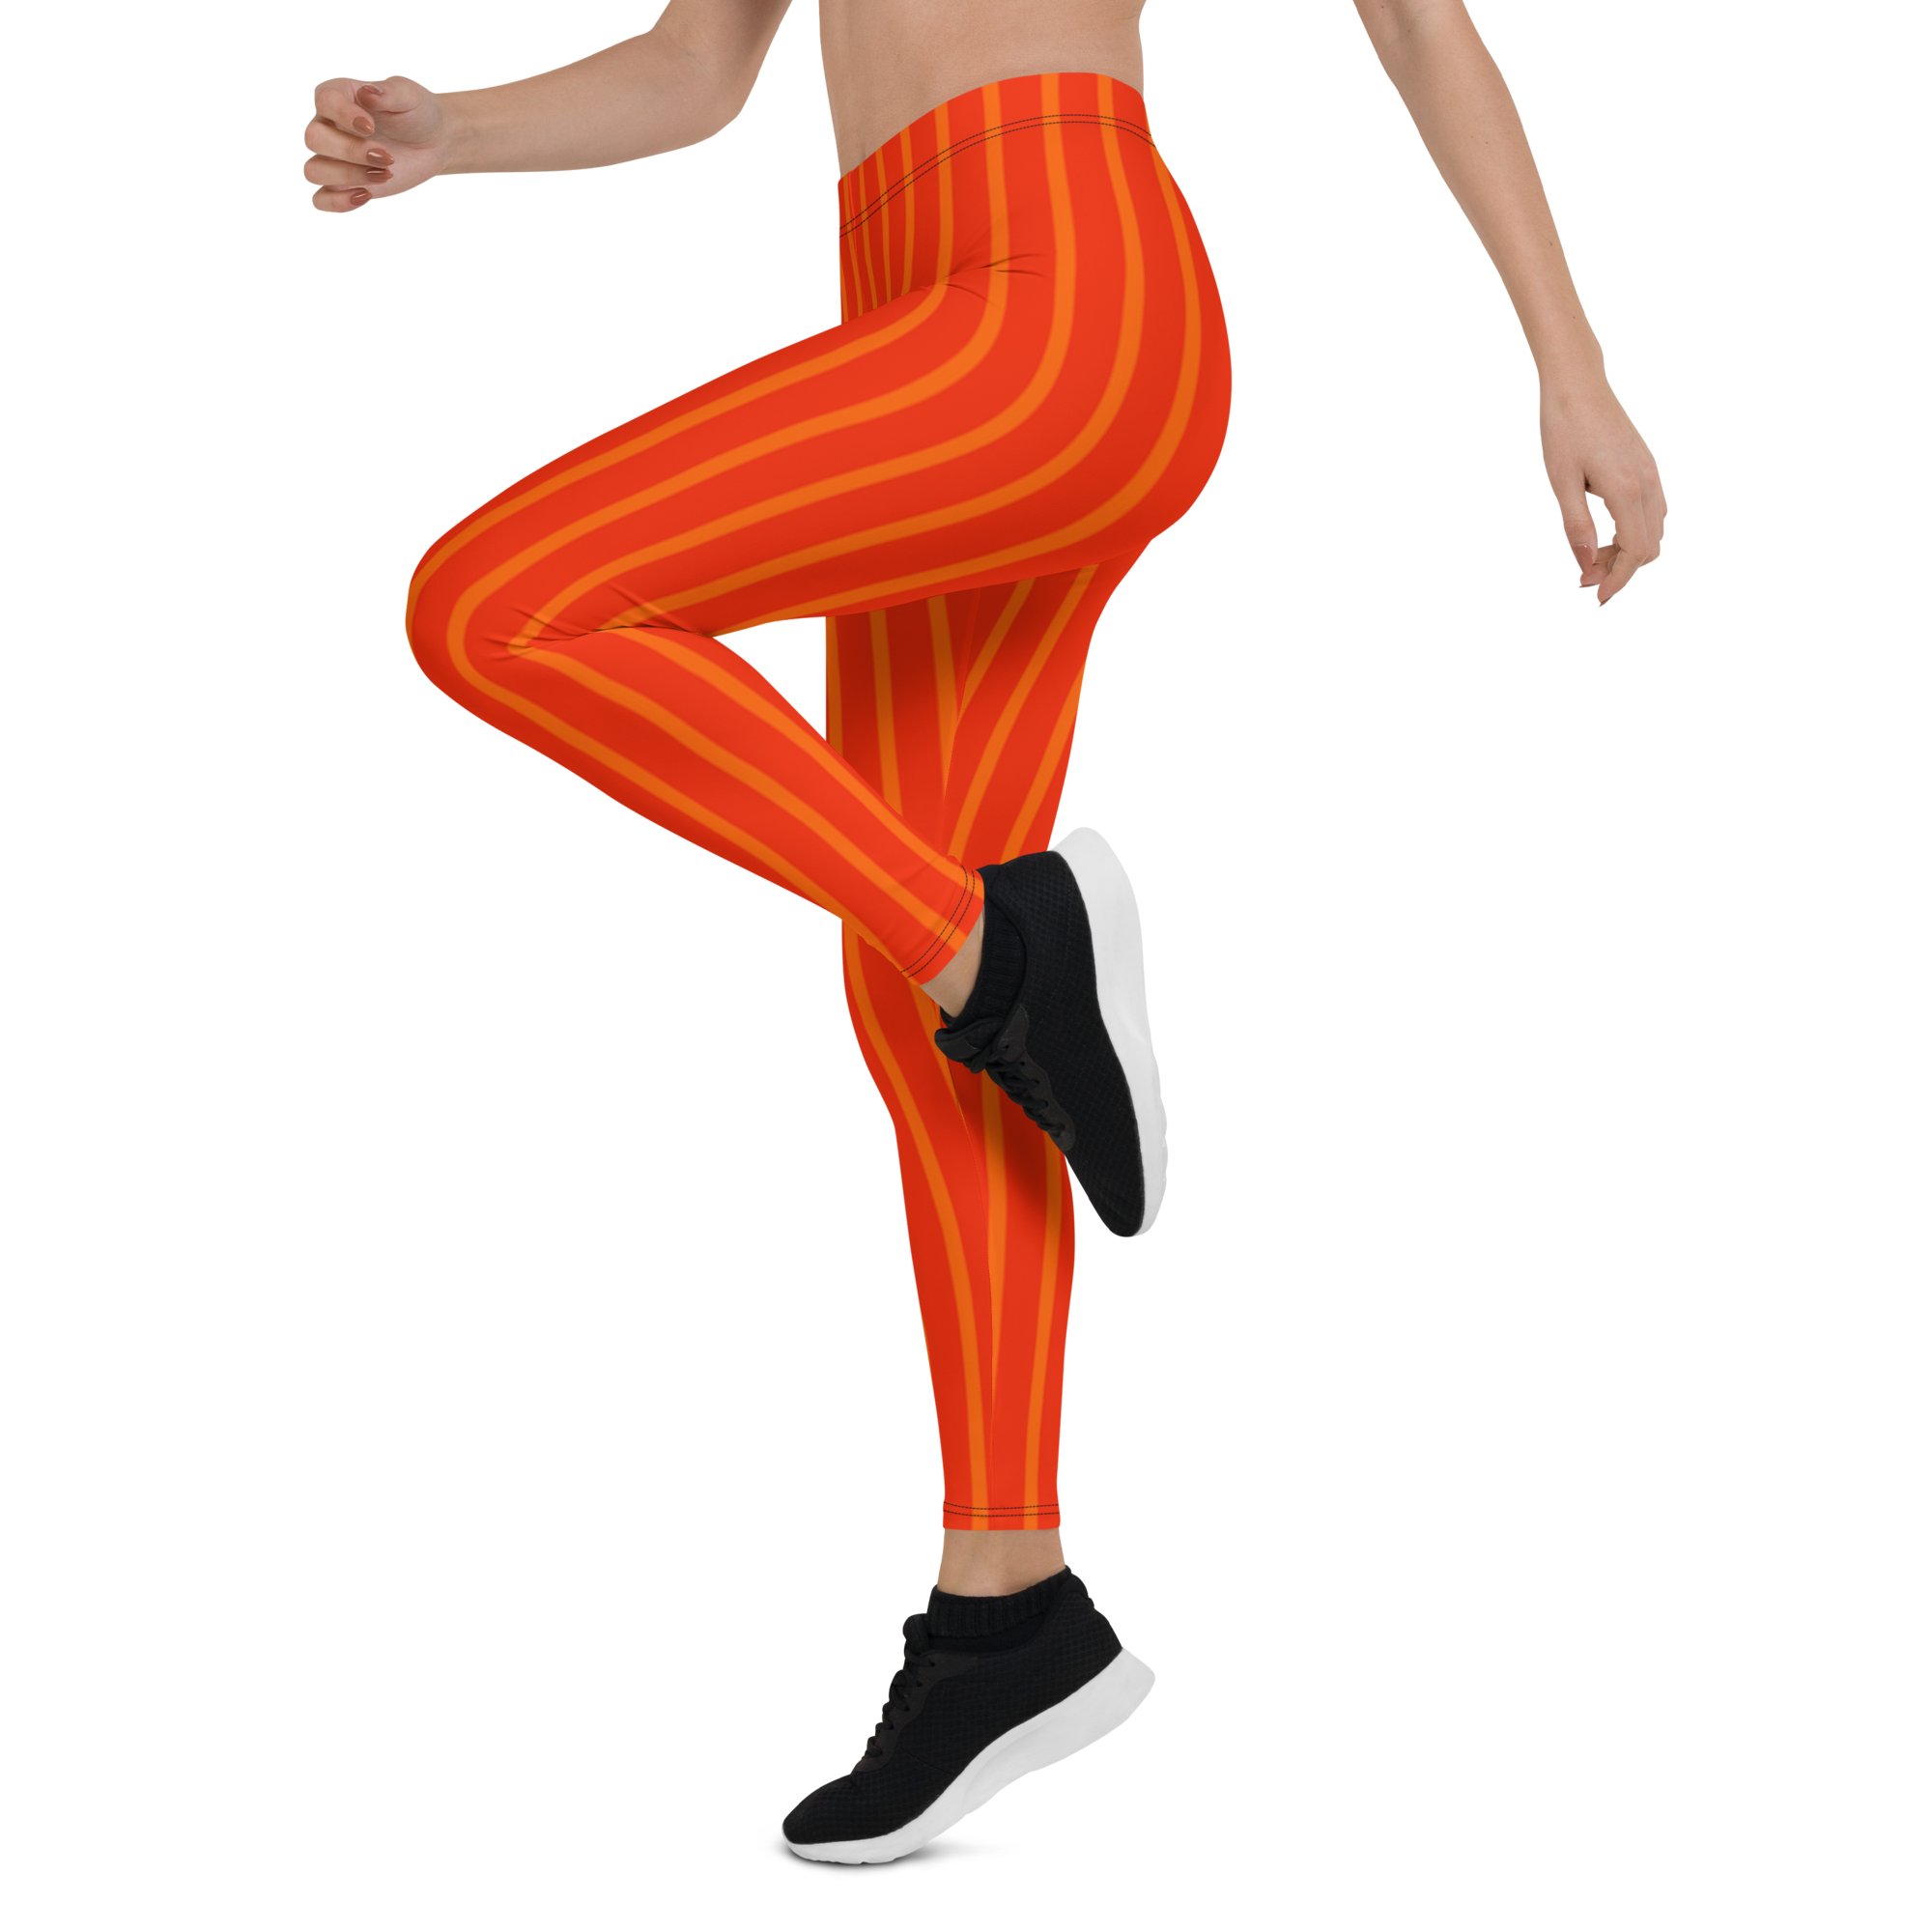 #c9517390 - ALTINO Leggings - Orange & Cherry Collection - Fitness - Stop Plastic Packaging - #PlasticCops - Apparel - Accessories - Clothing For Girls - Women Pants